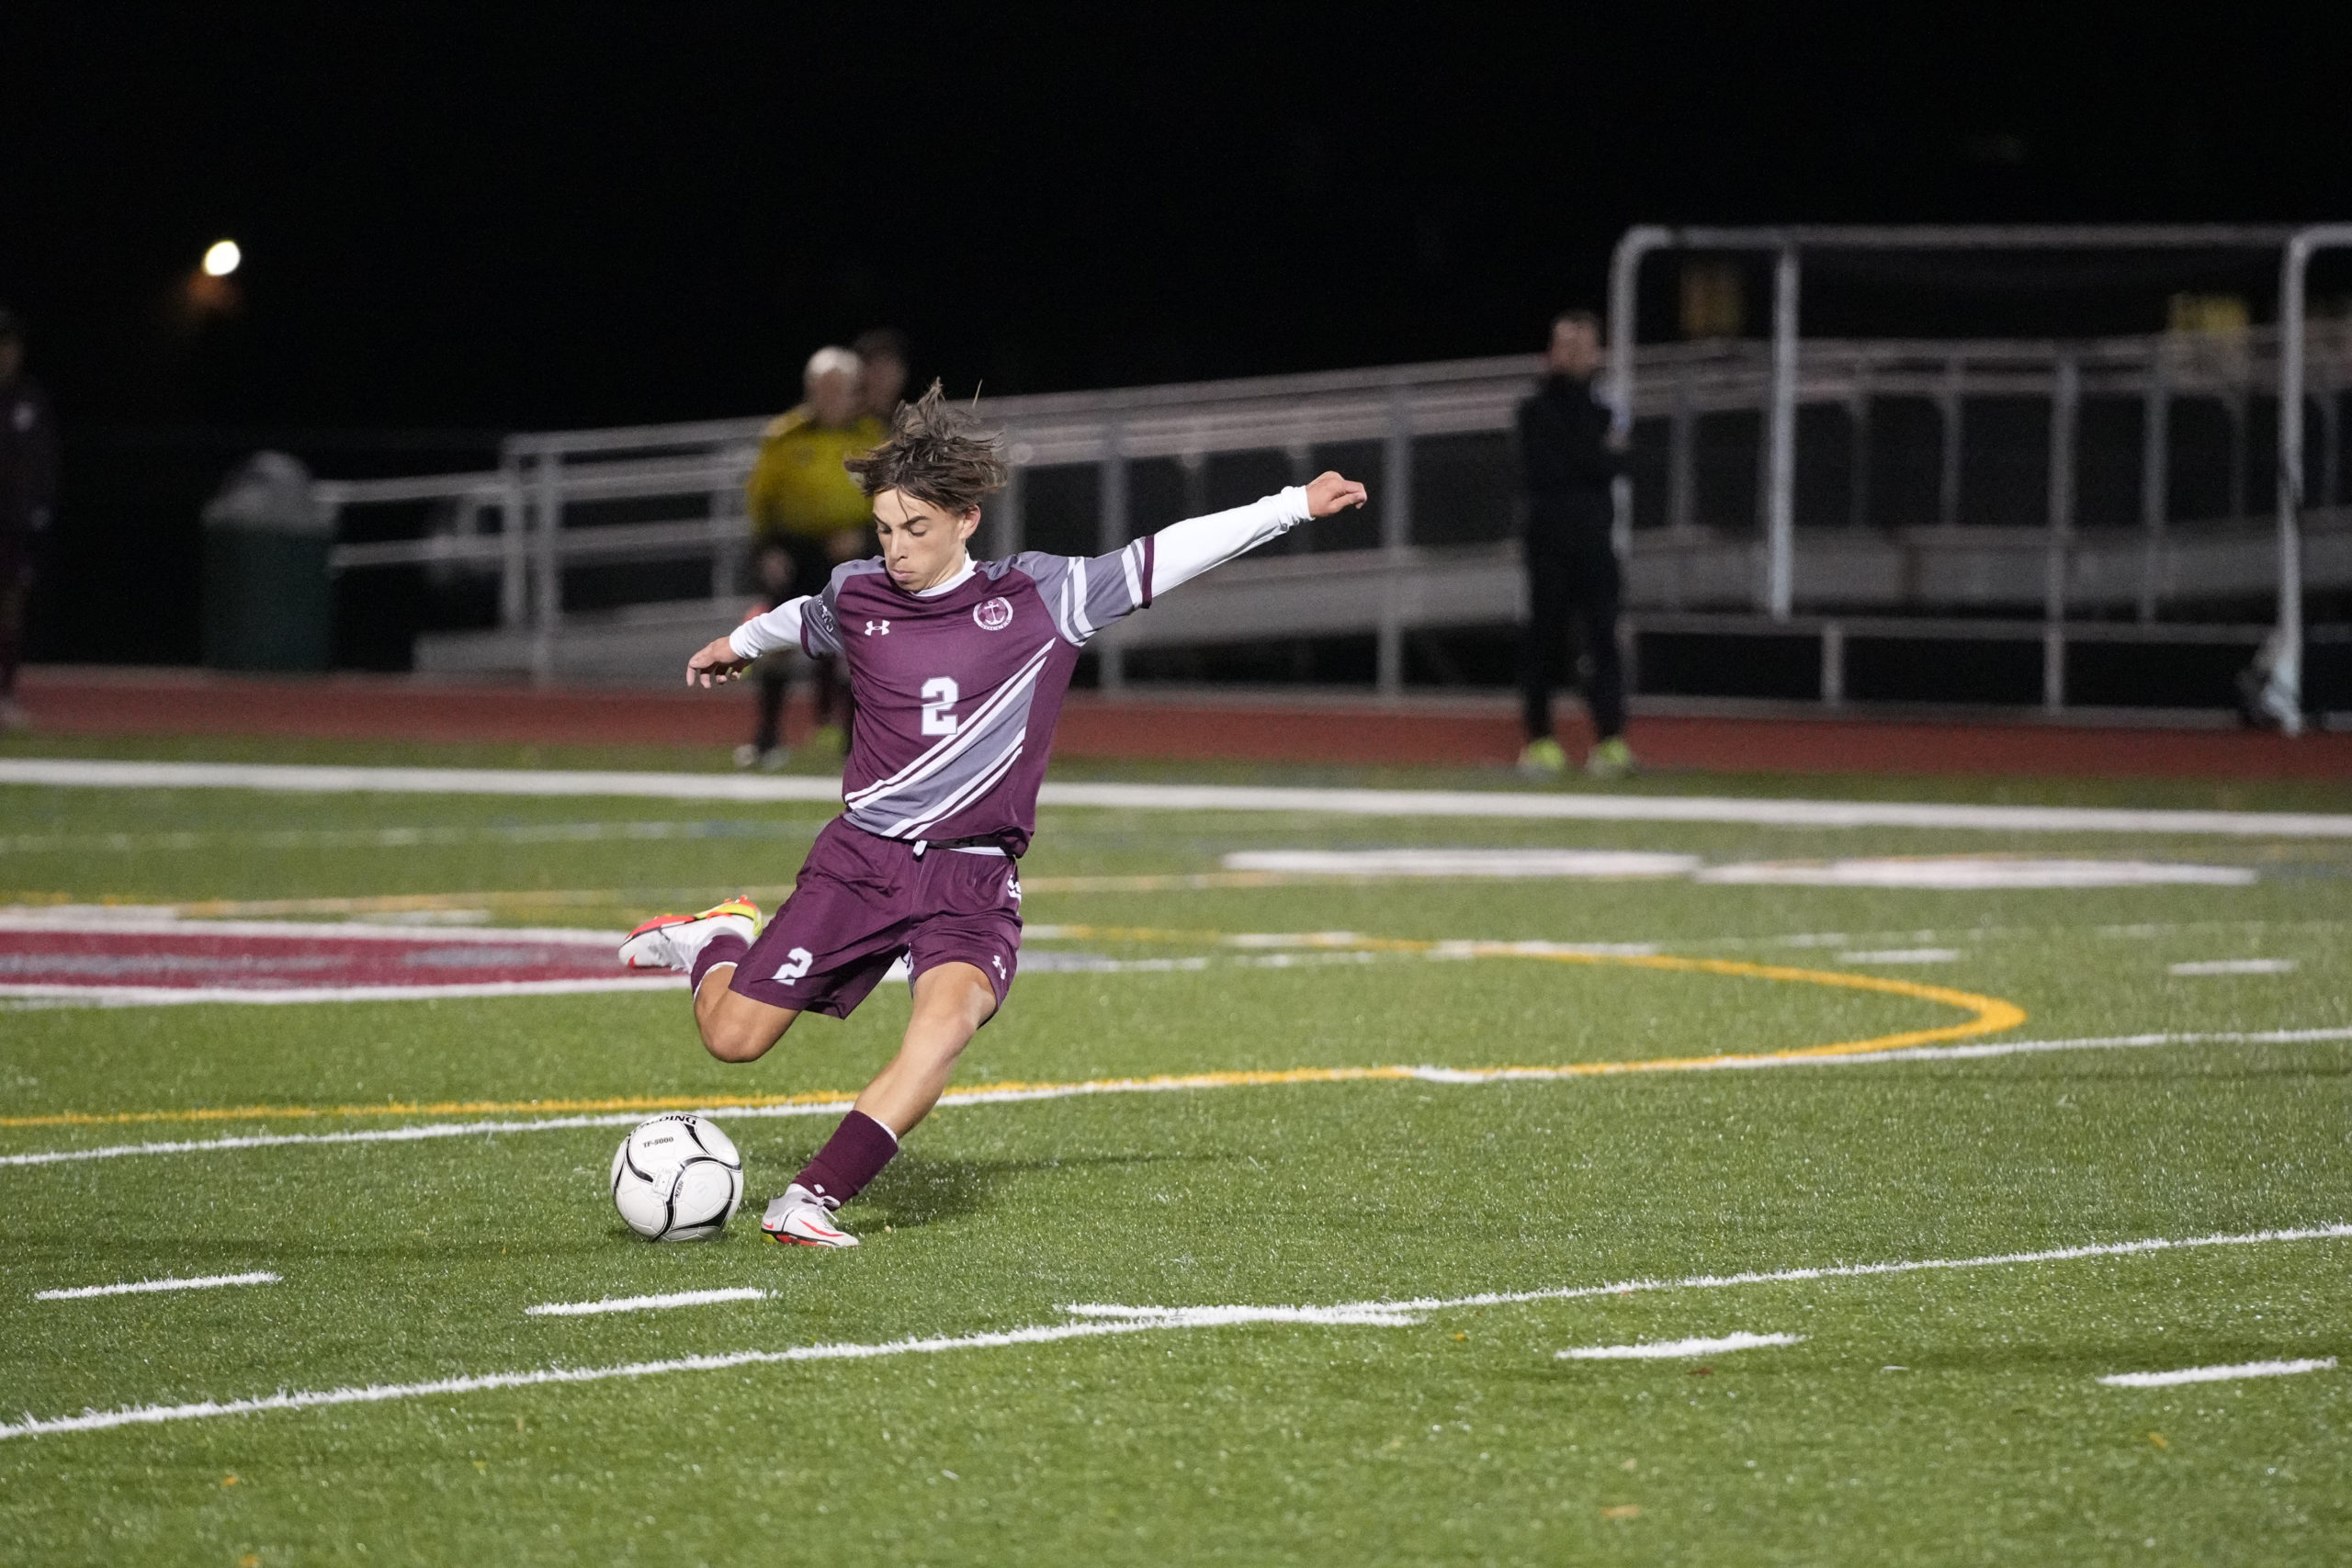 Christopher Sullivan is the youngest All-State selection in Southampton boys soccer history.